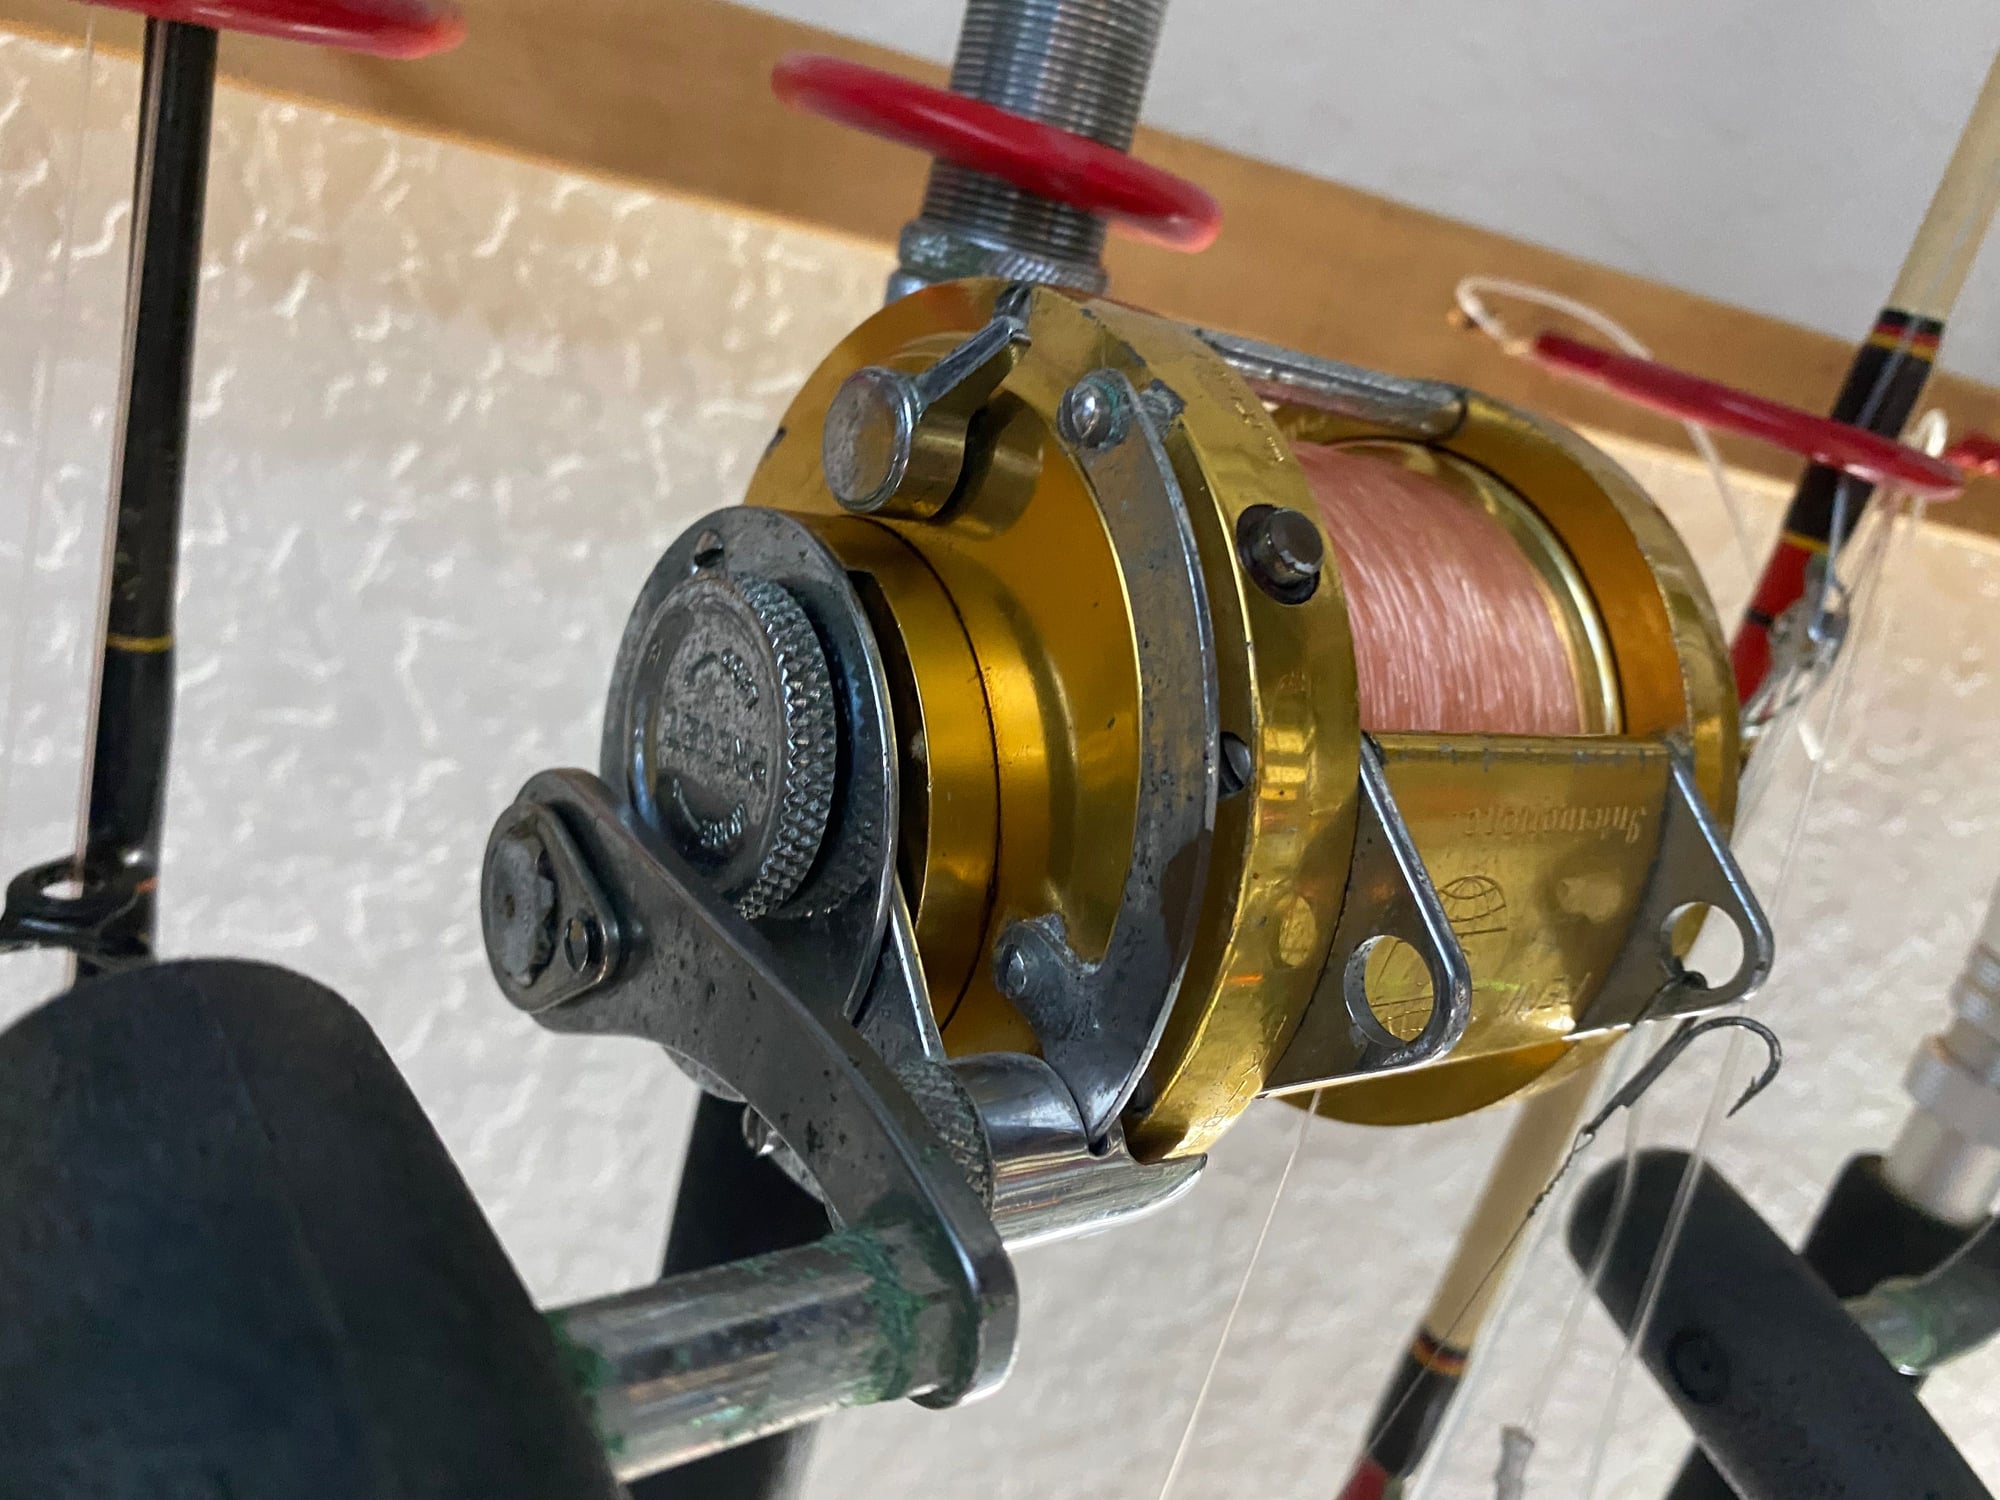 5 Penn Senator 114 HLW 6/0 fishing reels on 2 shakespeare 30-80 big game  rods - The Hull Truth - Boating and Fishing Forum